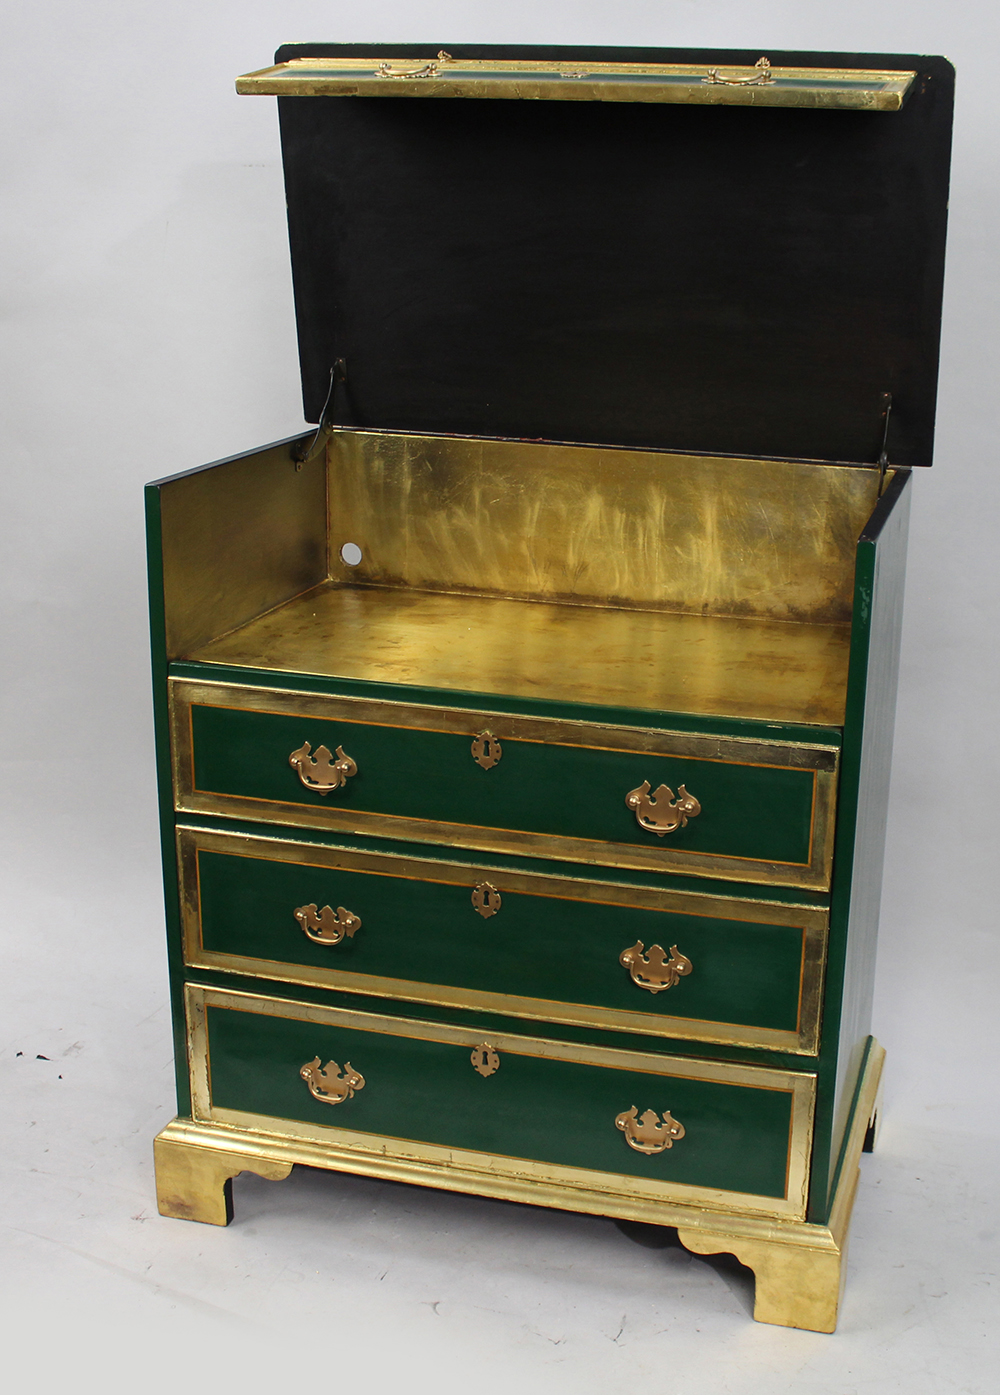 Vintage Painted Green & Gold Cocktail Cabinet - Image 4 of 7